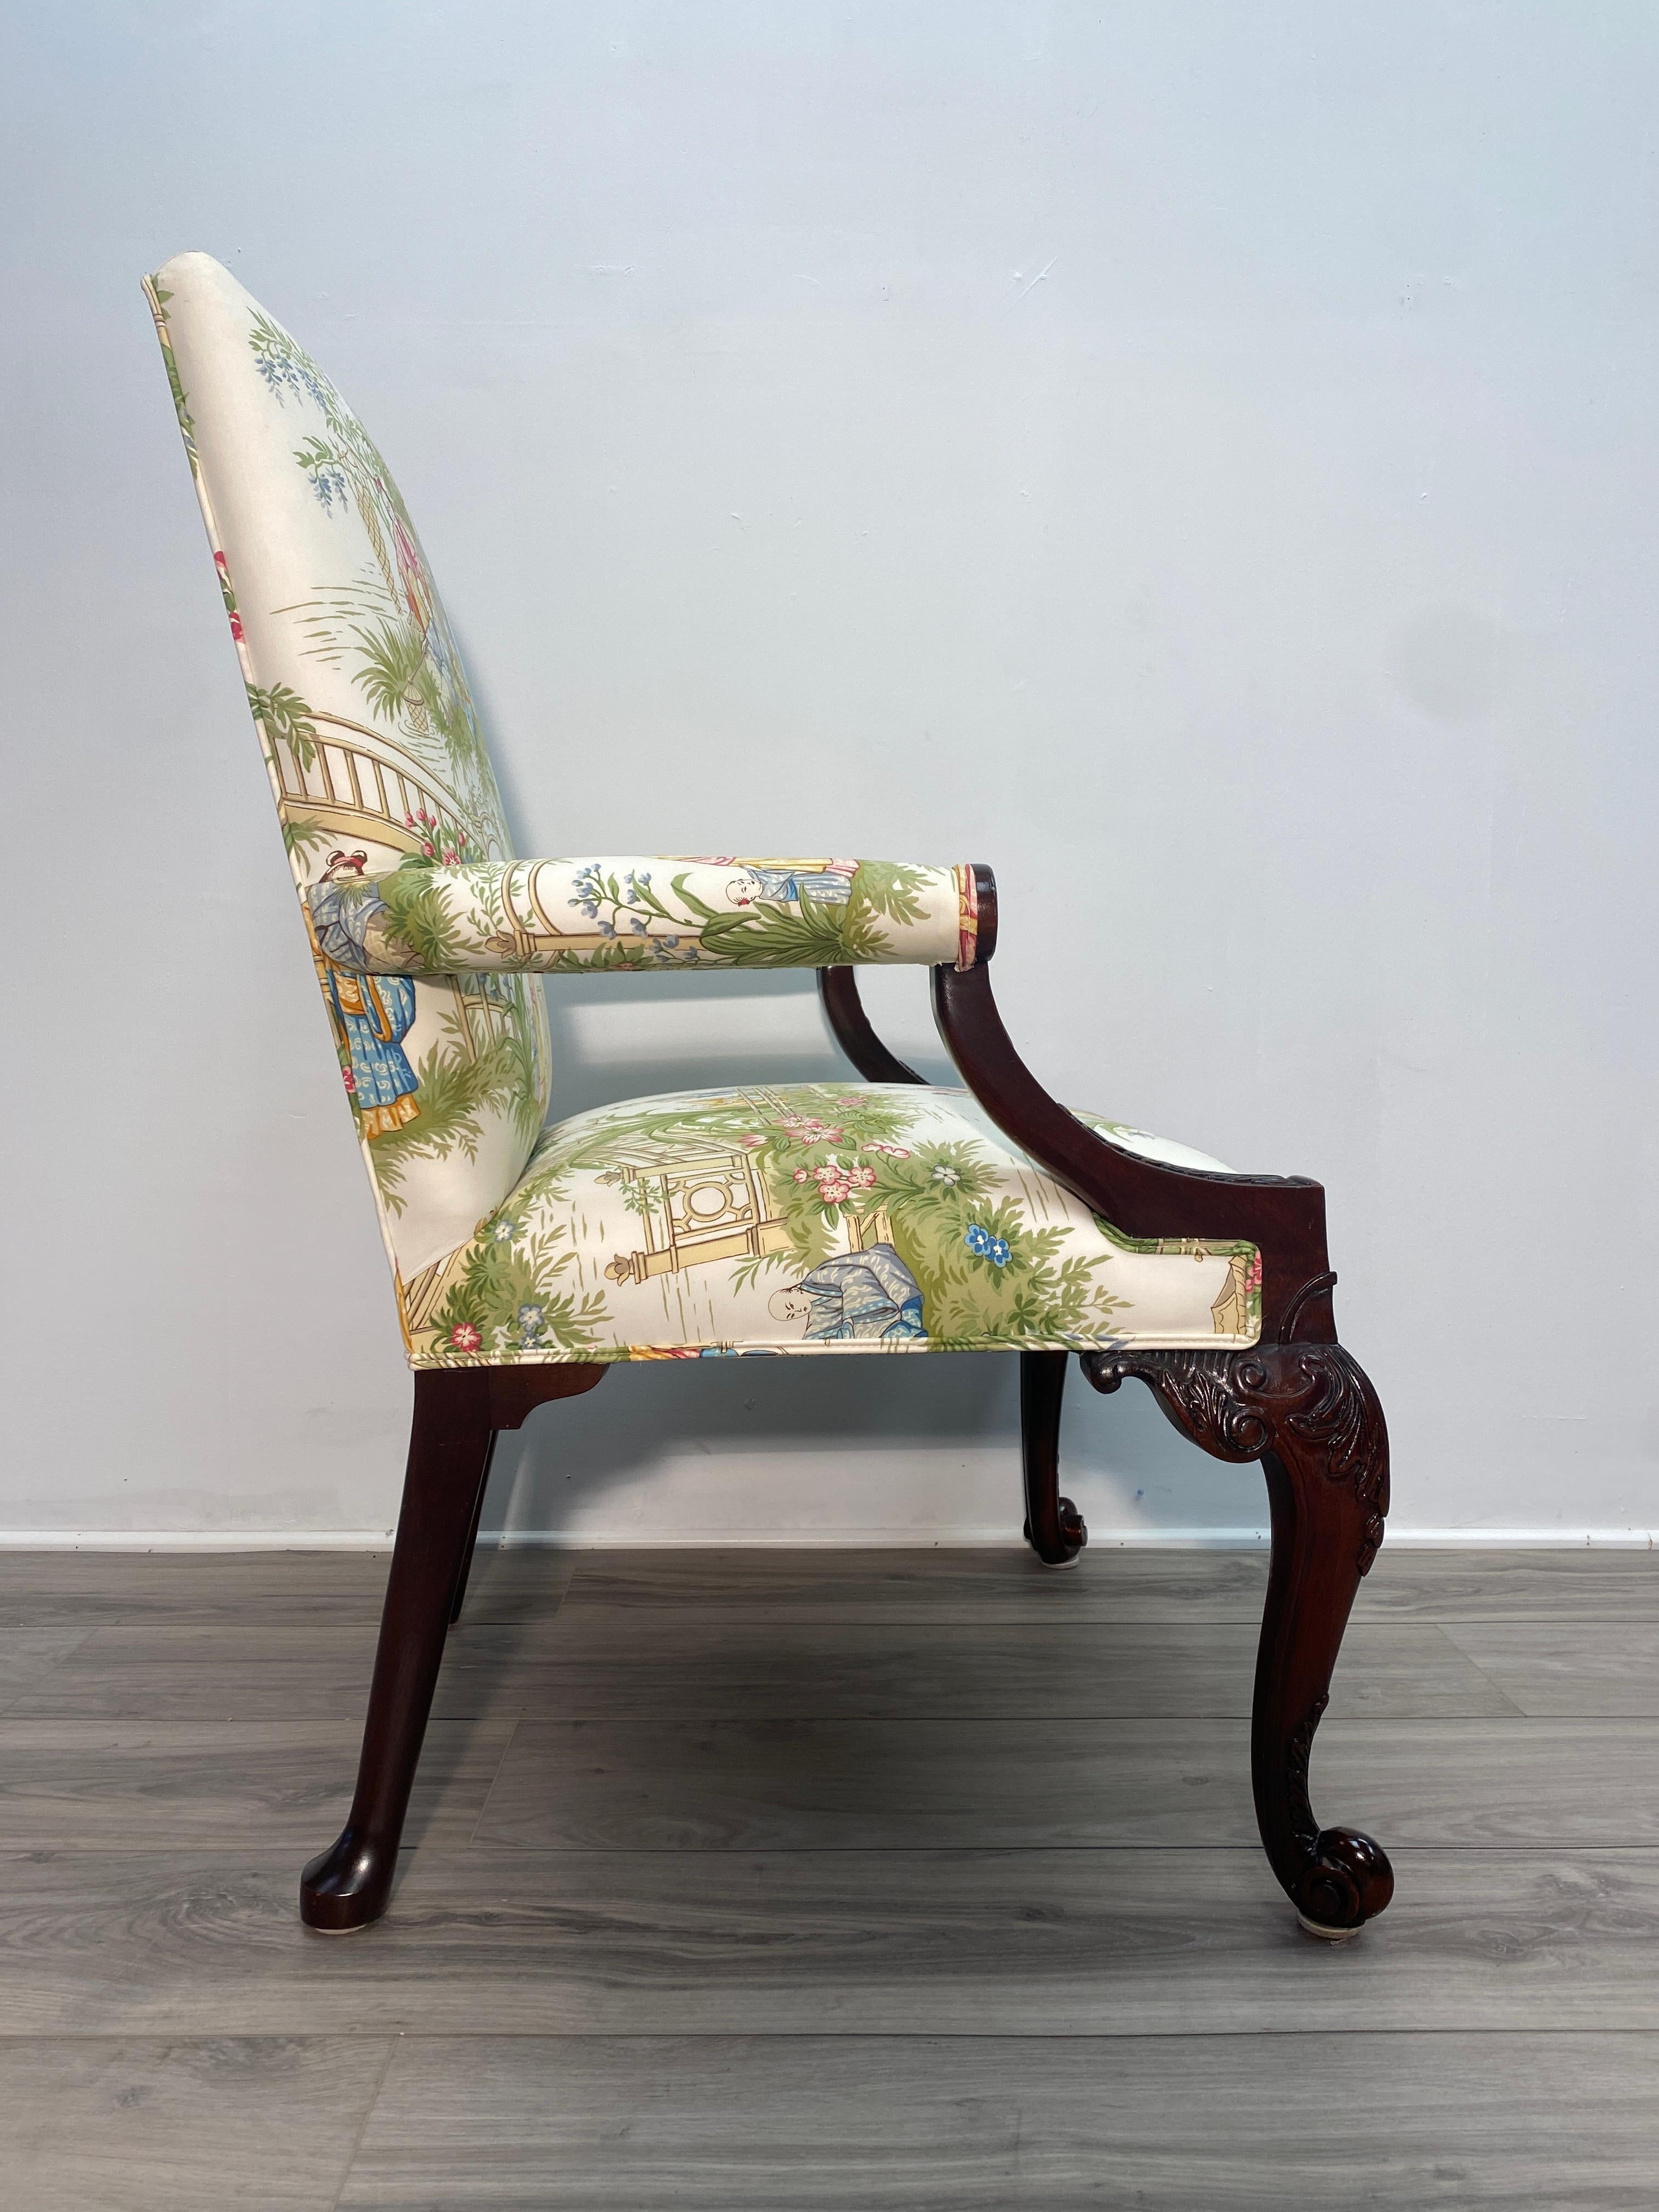 A handsome Chippendale style Gainsborough arm chair with carved mahogany upholstered in silk Chinoiserie fabric. 20th century. Very good condition. 

Measures: 26